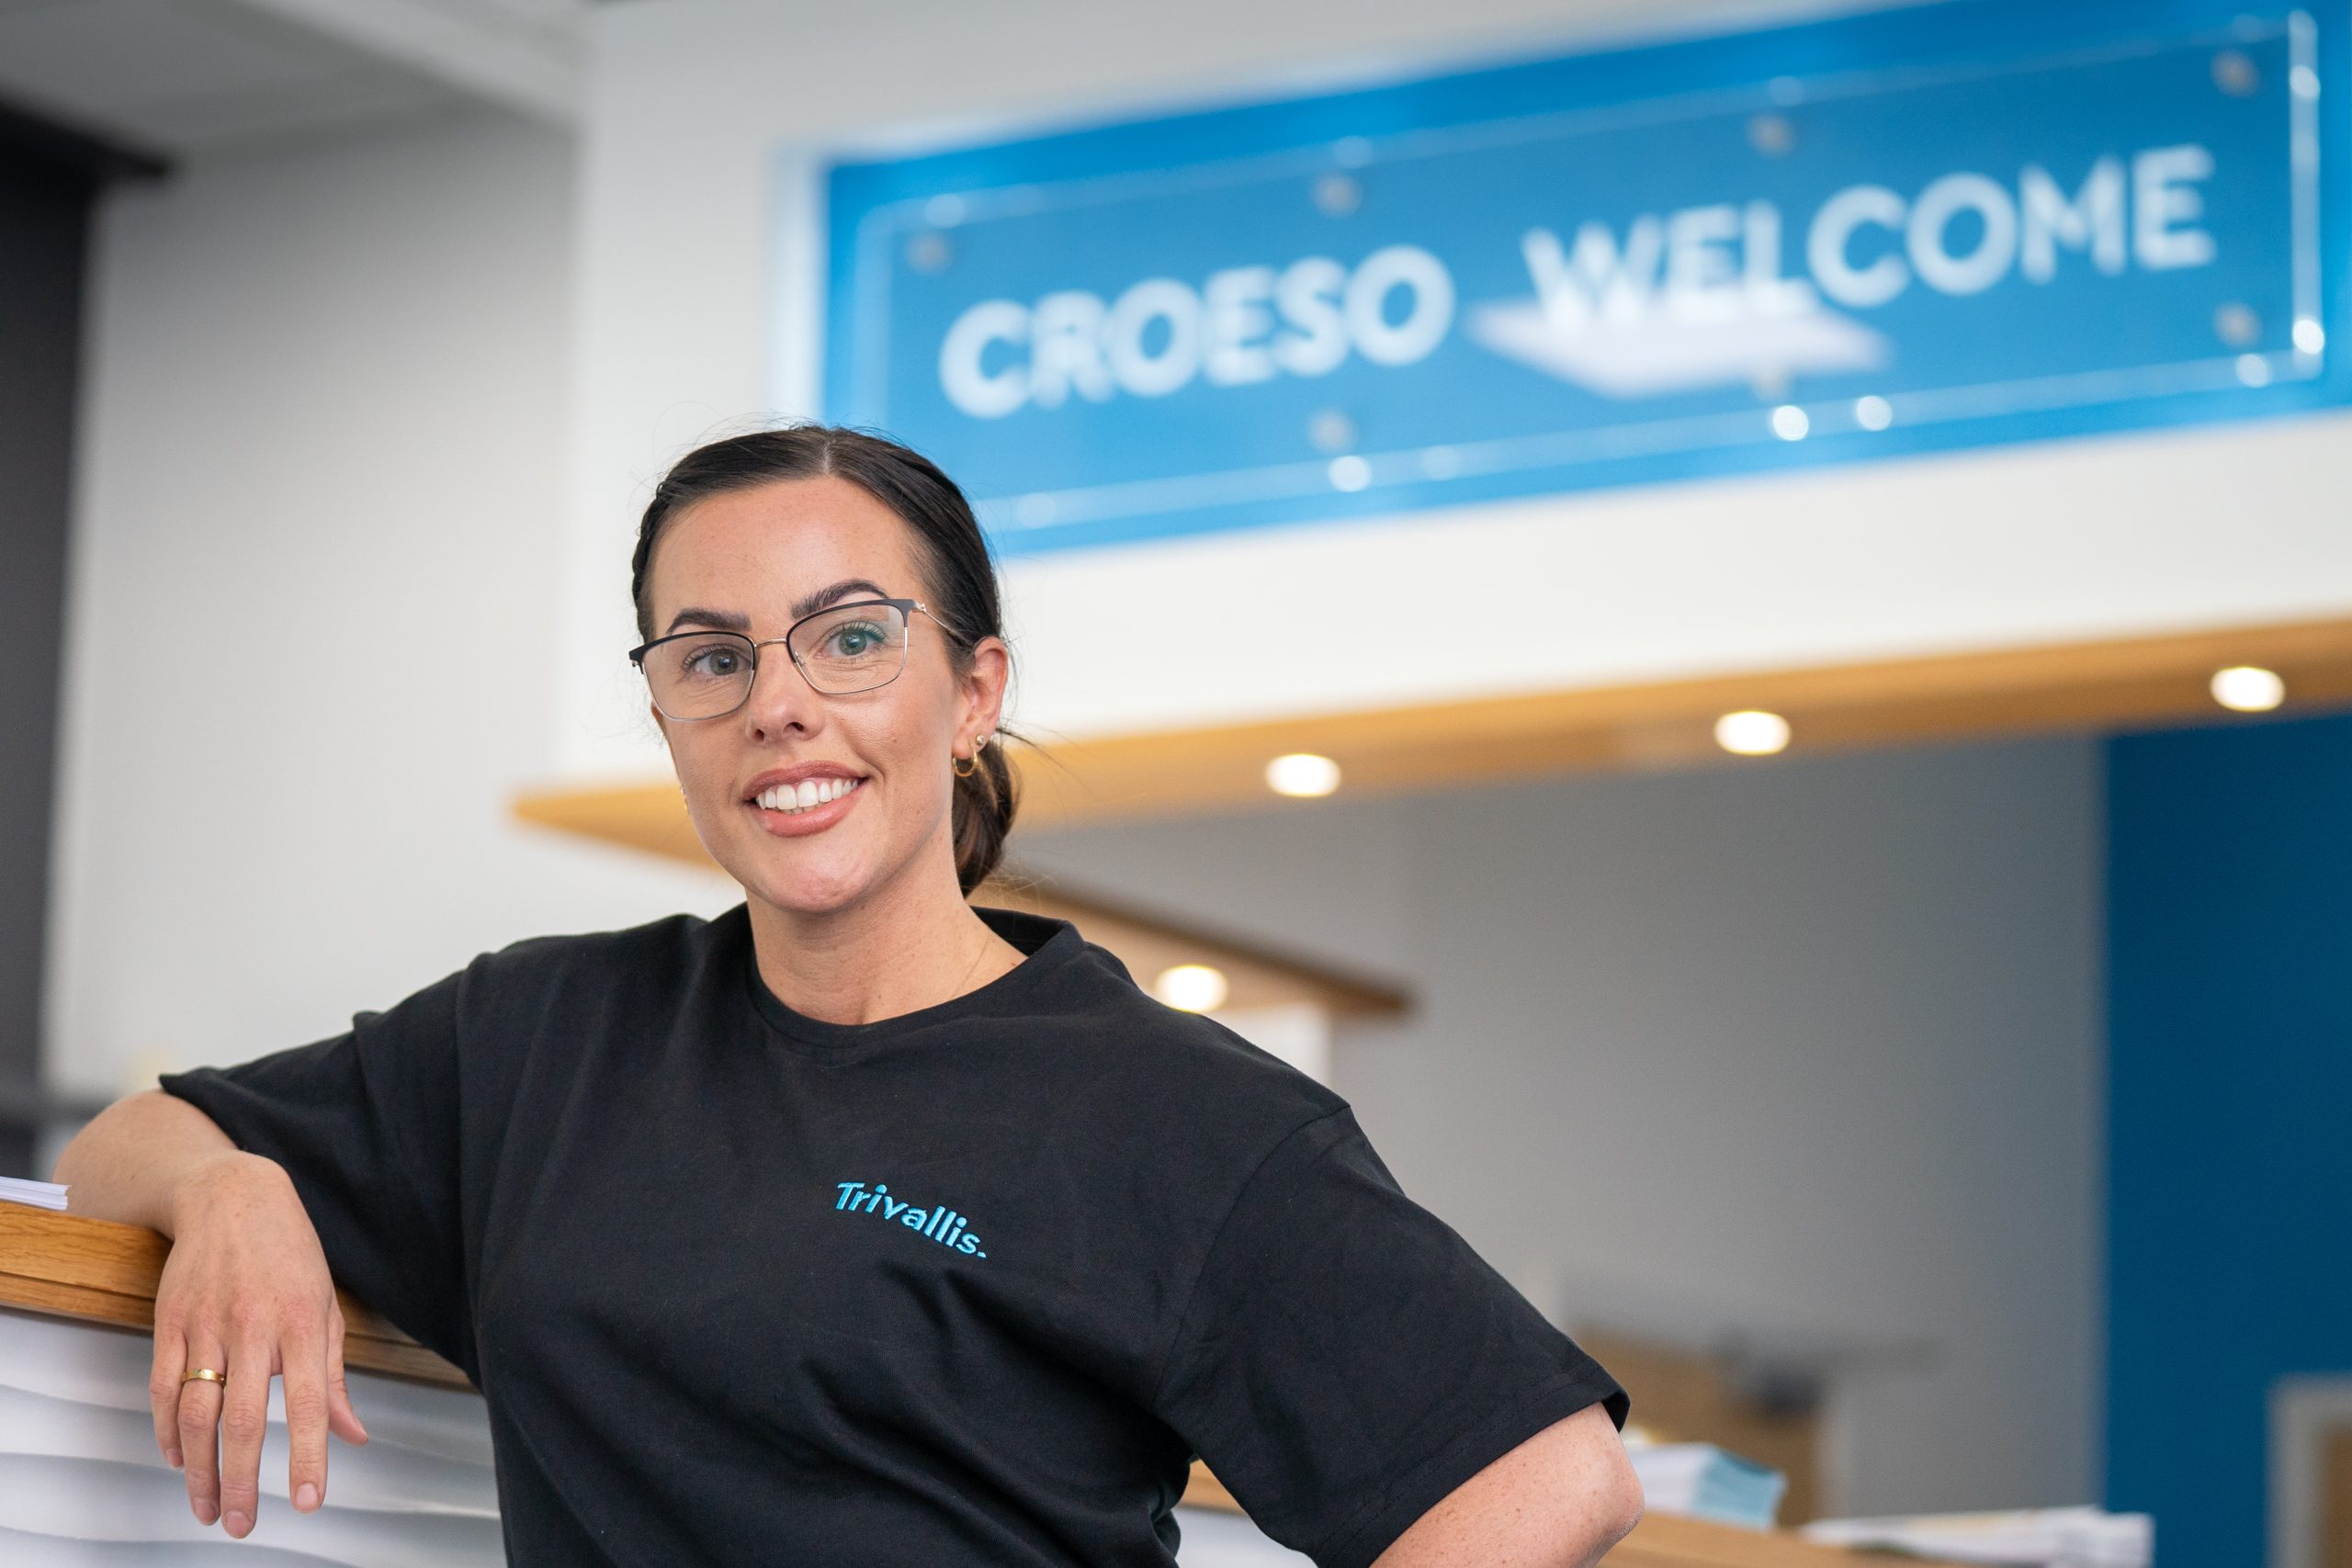 Trivallis Housing Landlord Wales A woman with glasses and a black shirt marked "trivallis" stands smiling at a reception desk. Above her, a sign reads "croeso welcome" in blue letters.